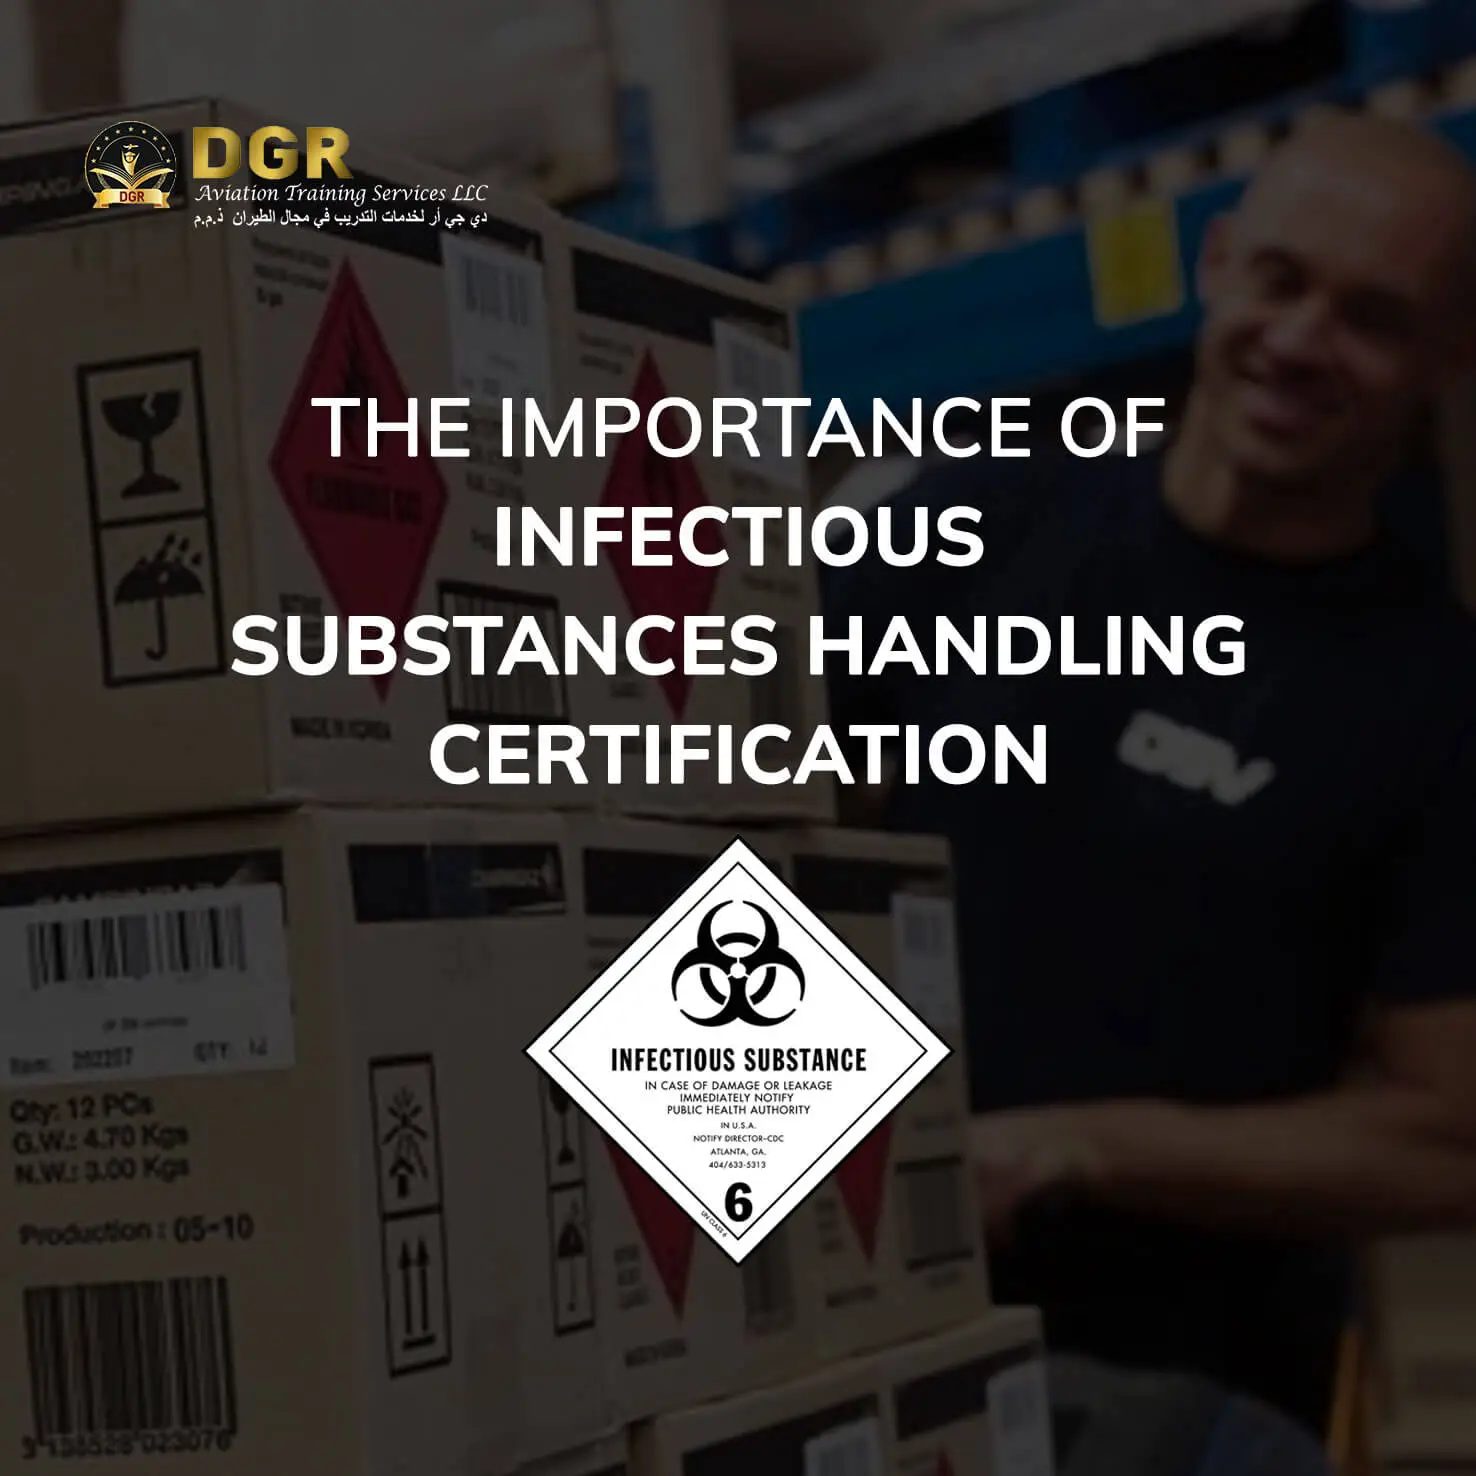 infectious substances handling training